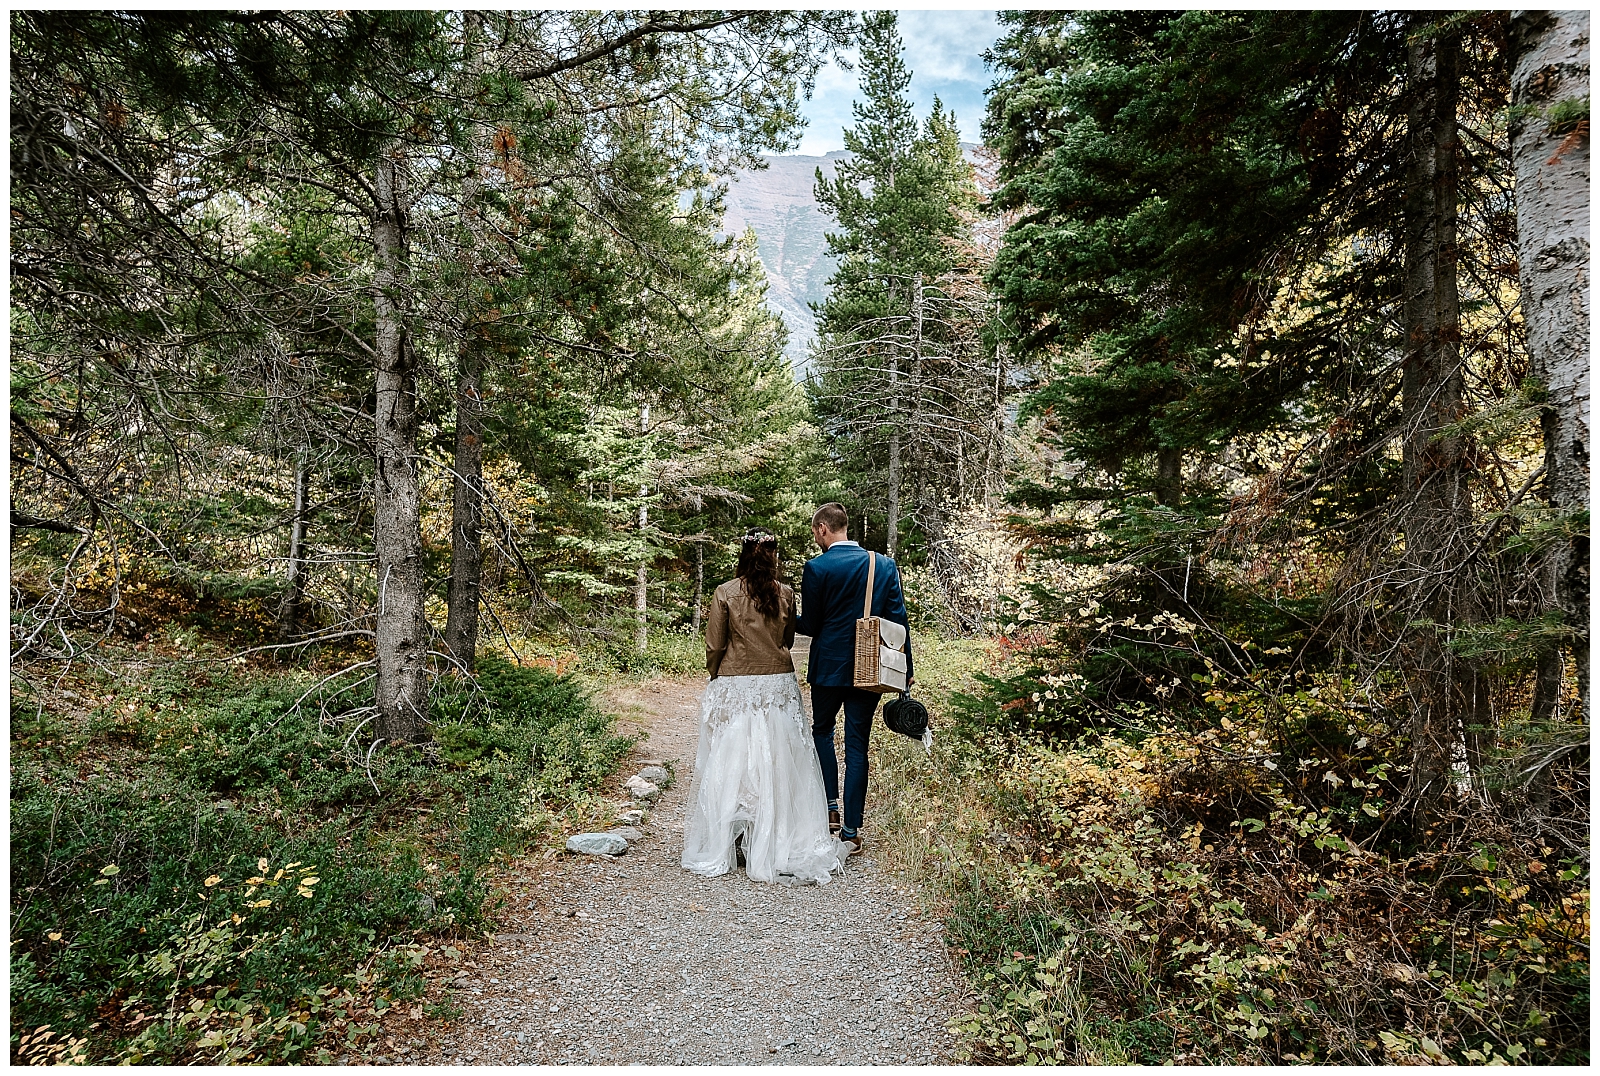 Strolling through the forest at their Lake McDonald Elopement